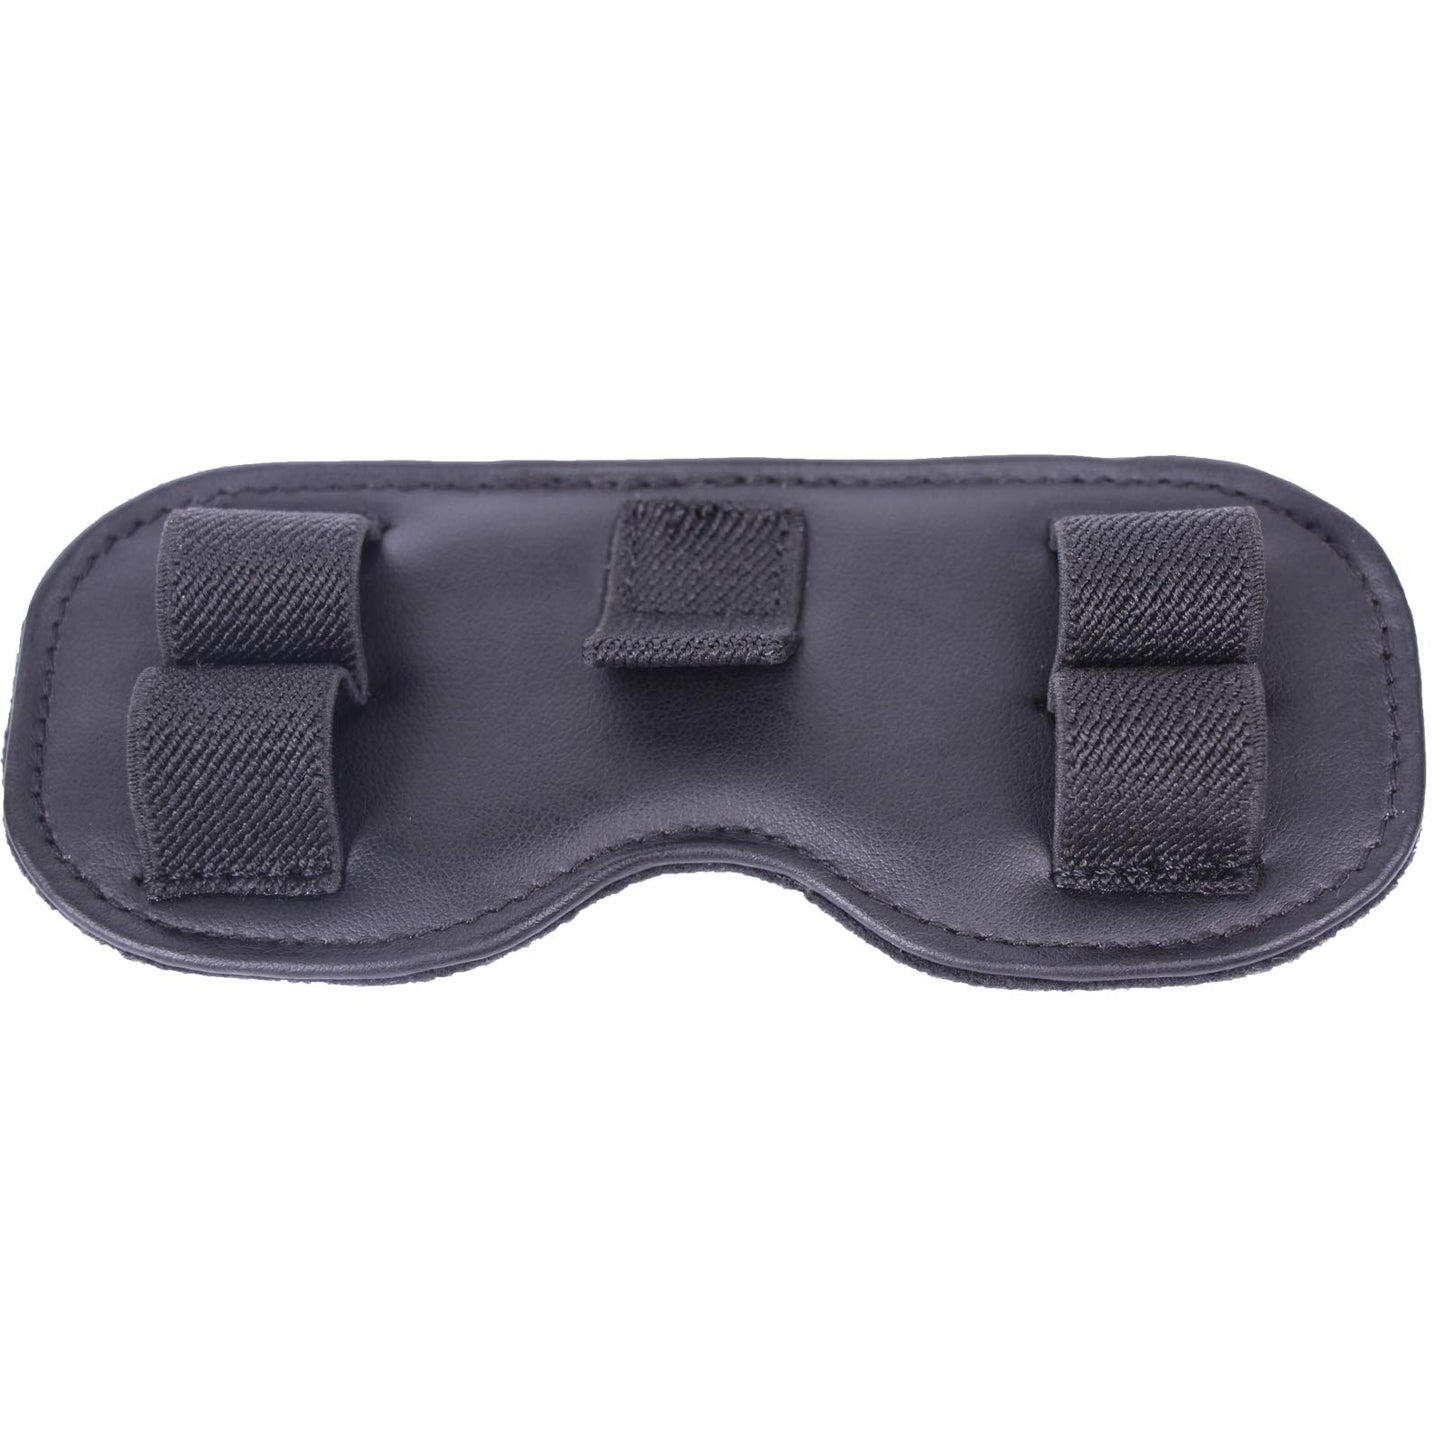 Protect Cover for DJI FPV Goggles V2 Dustproof Sunshade Pad Antenna microSD Card Storage Holder for DJI FPV Combo Accessories